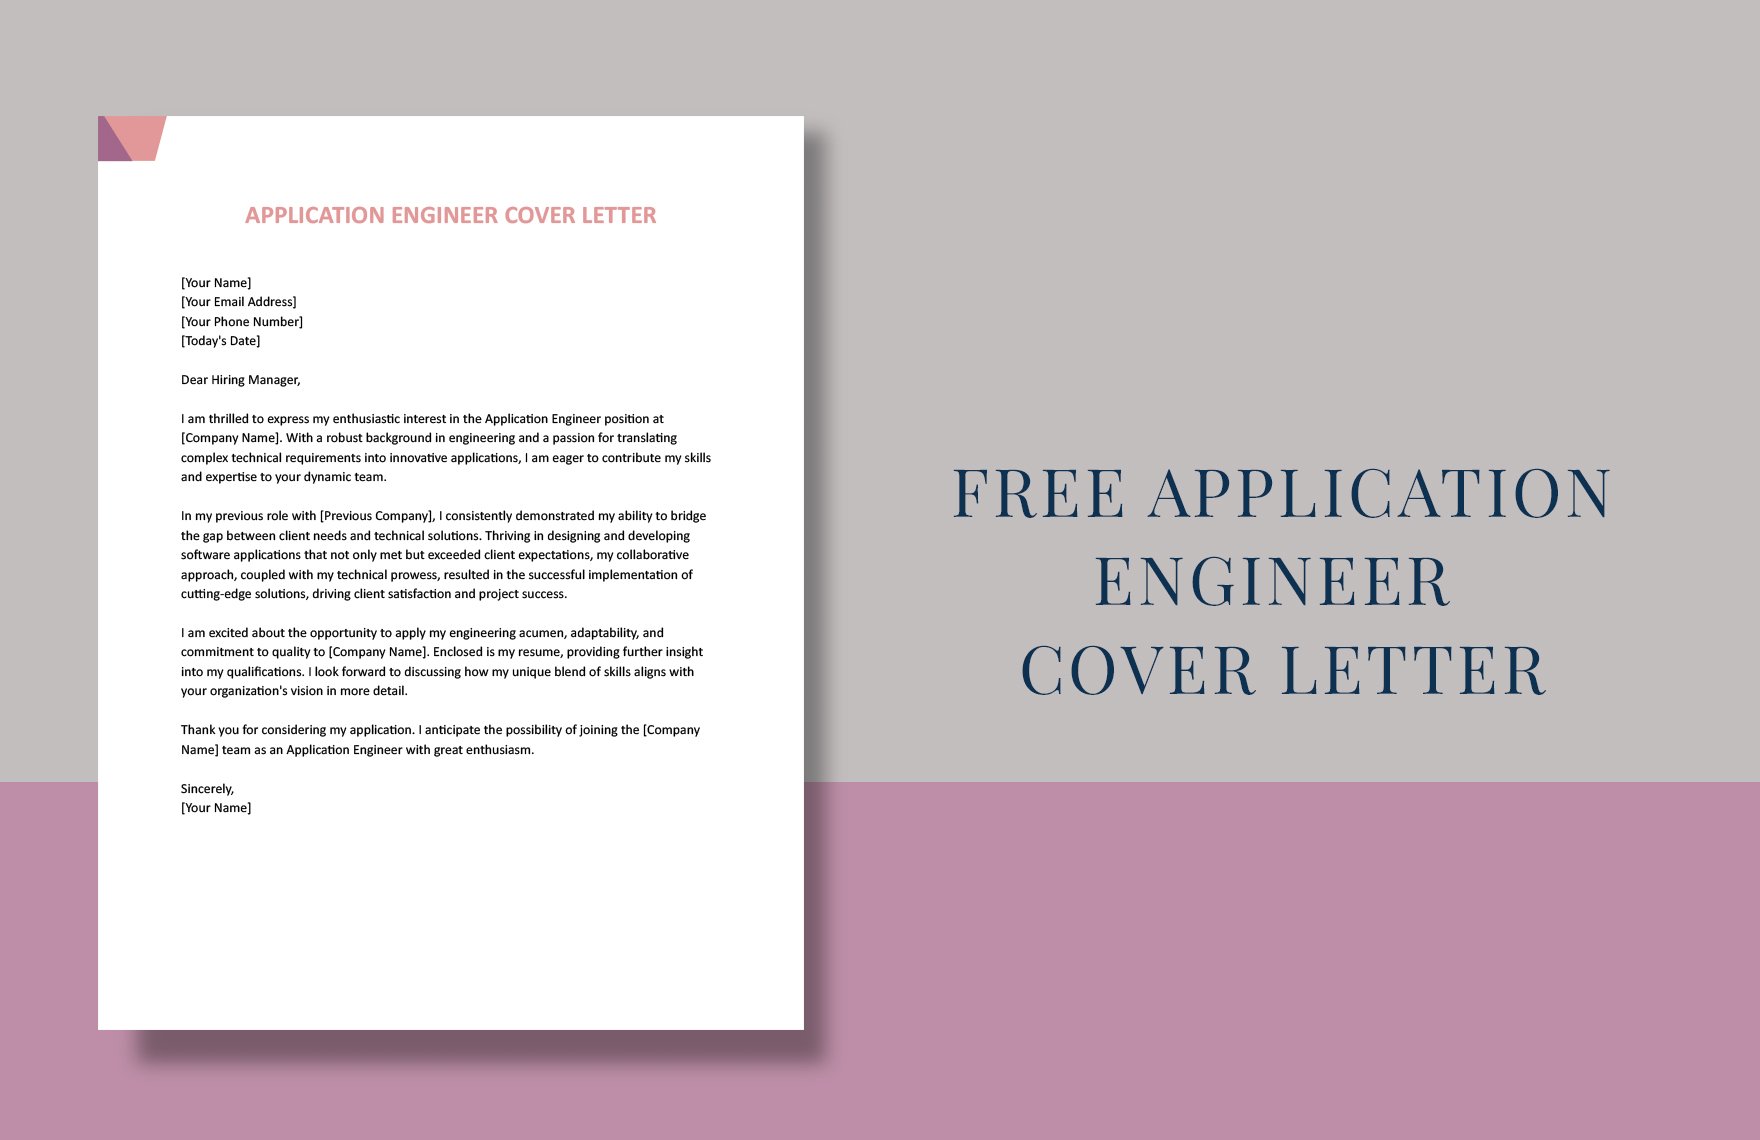 Application Engineer Cover Letter